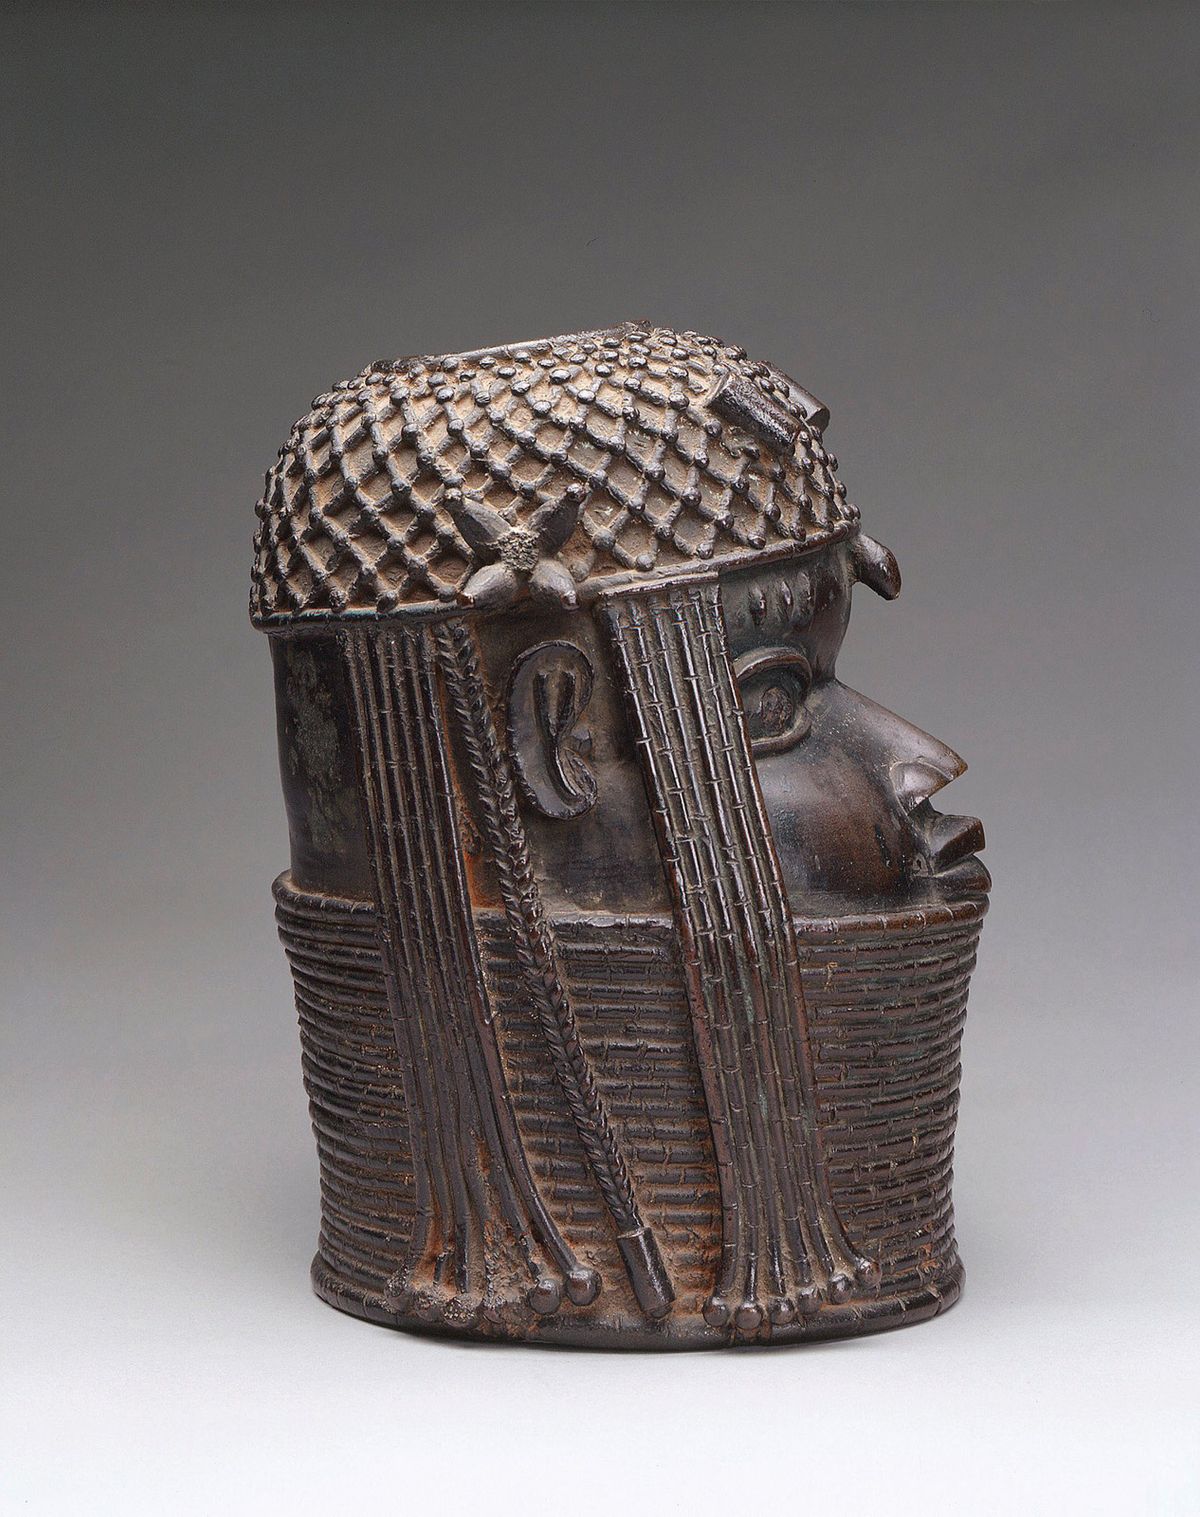 The Benin head of an oba, around 1650, was looted twice Royal Collection Trust © Her Majesty Queen Elizabeth II 2021